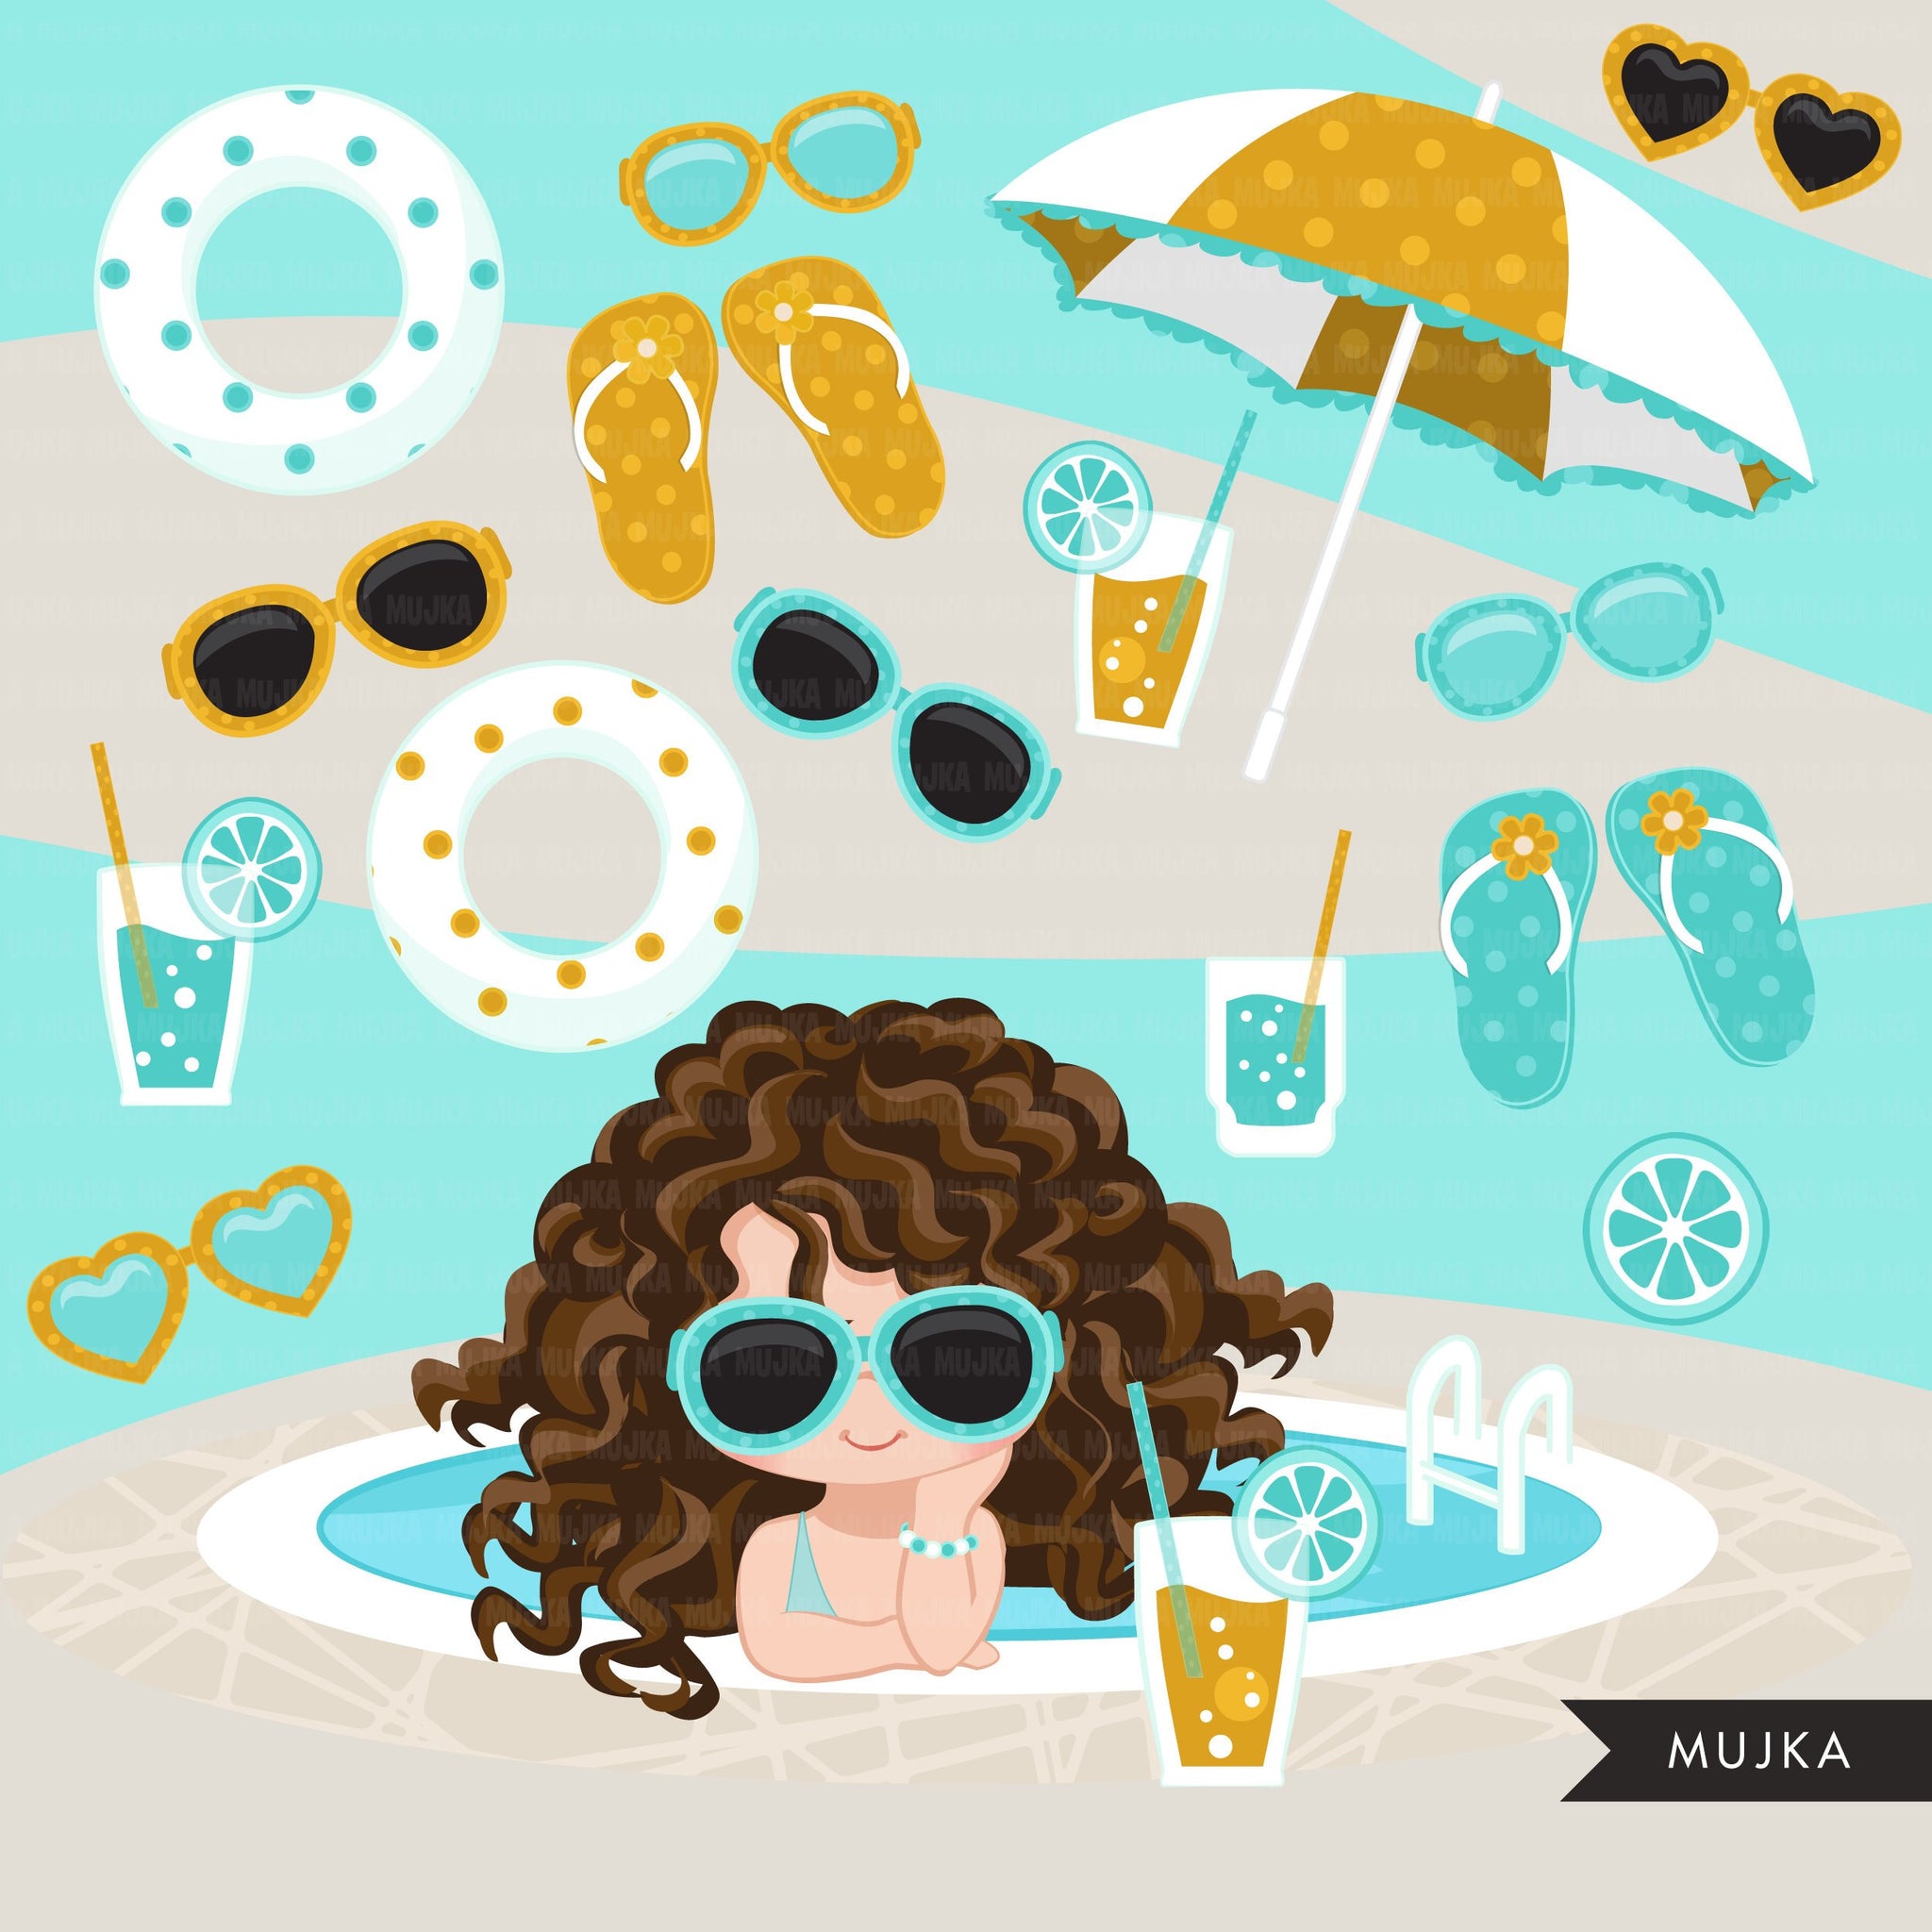 Watercolor Pool Party Clipart, swimming pool png, summer png